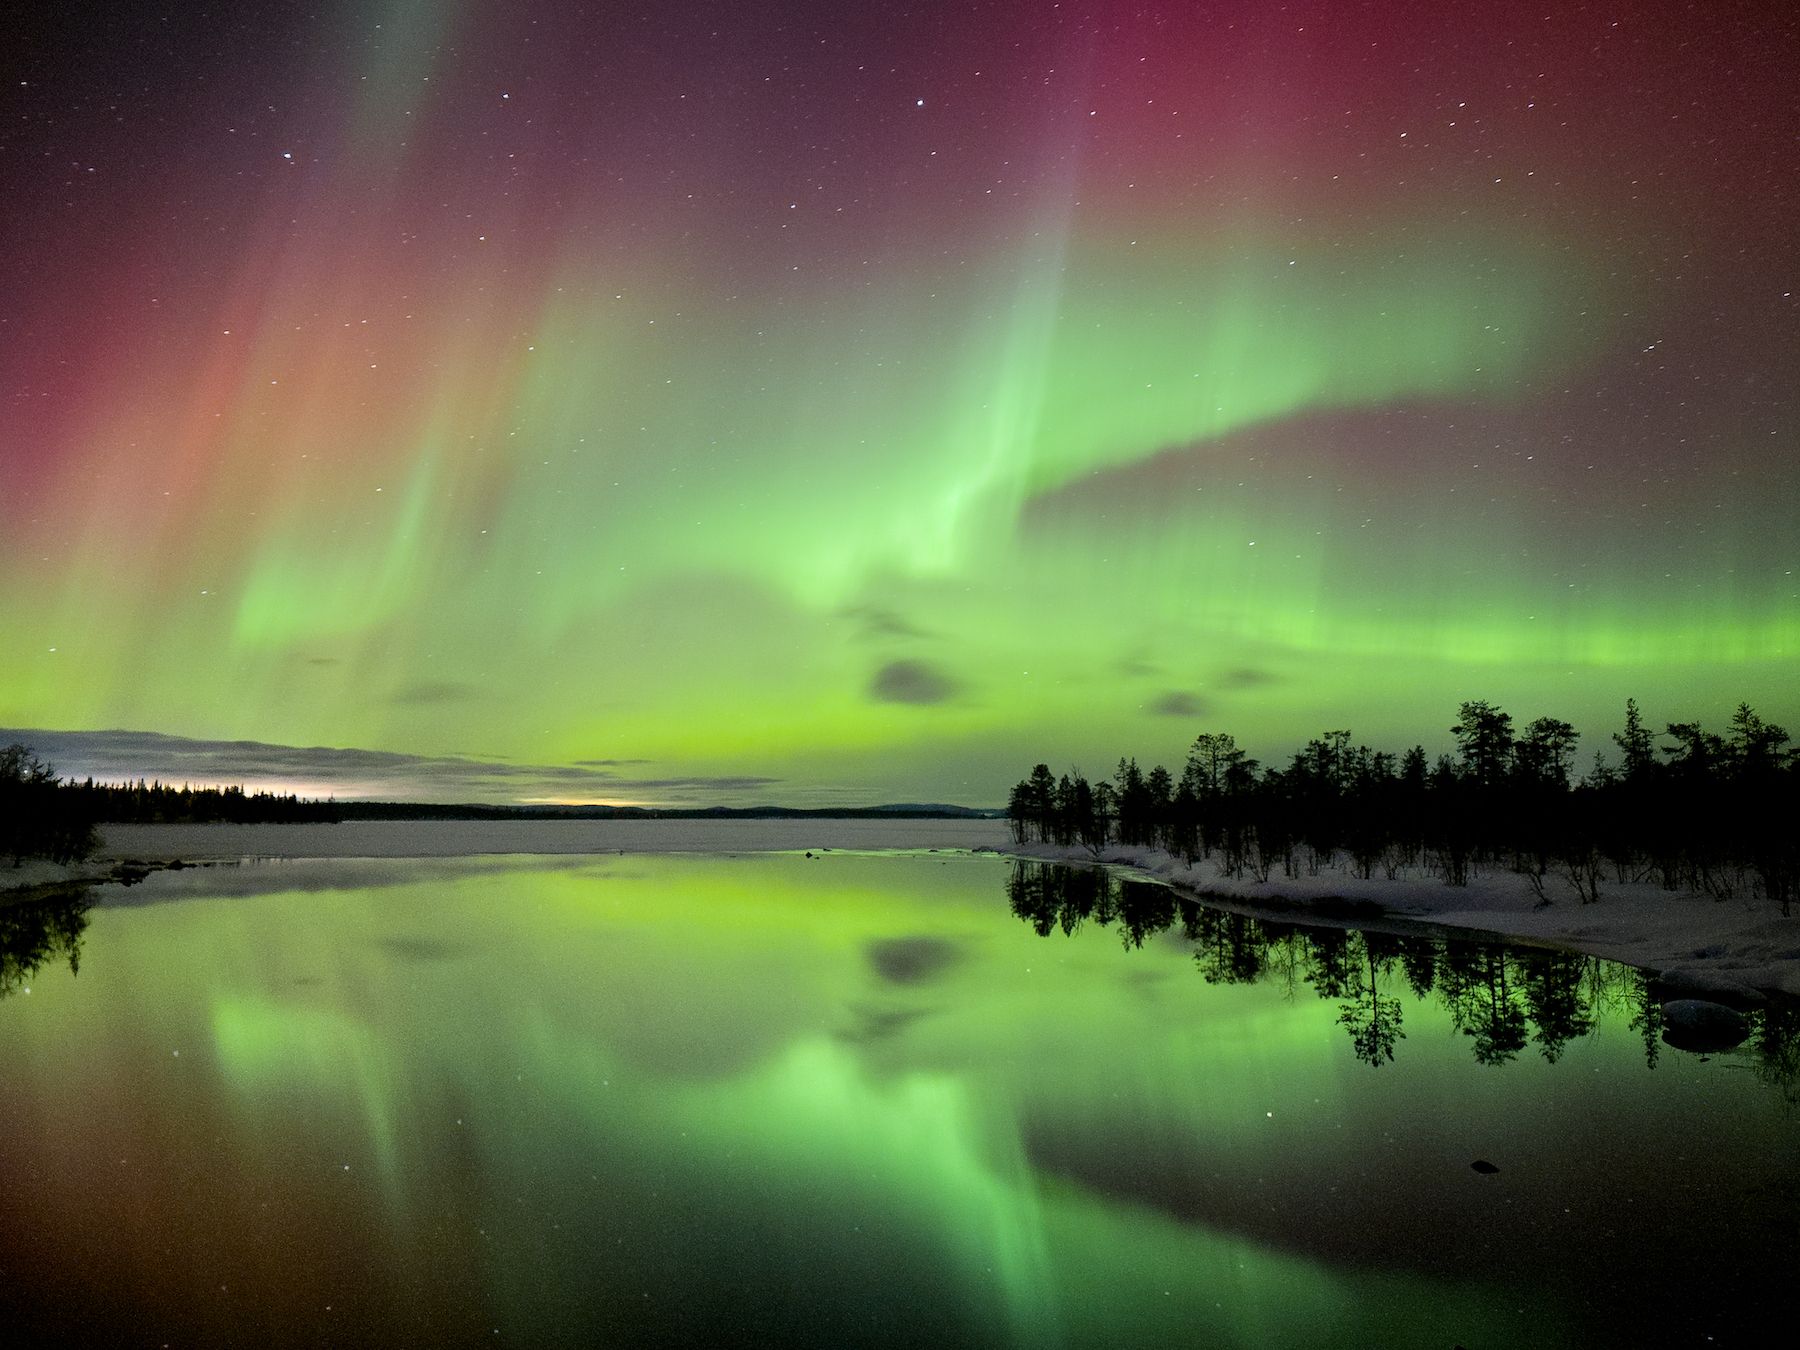 a green and purple aurora over a lake with trees and a body of water